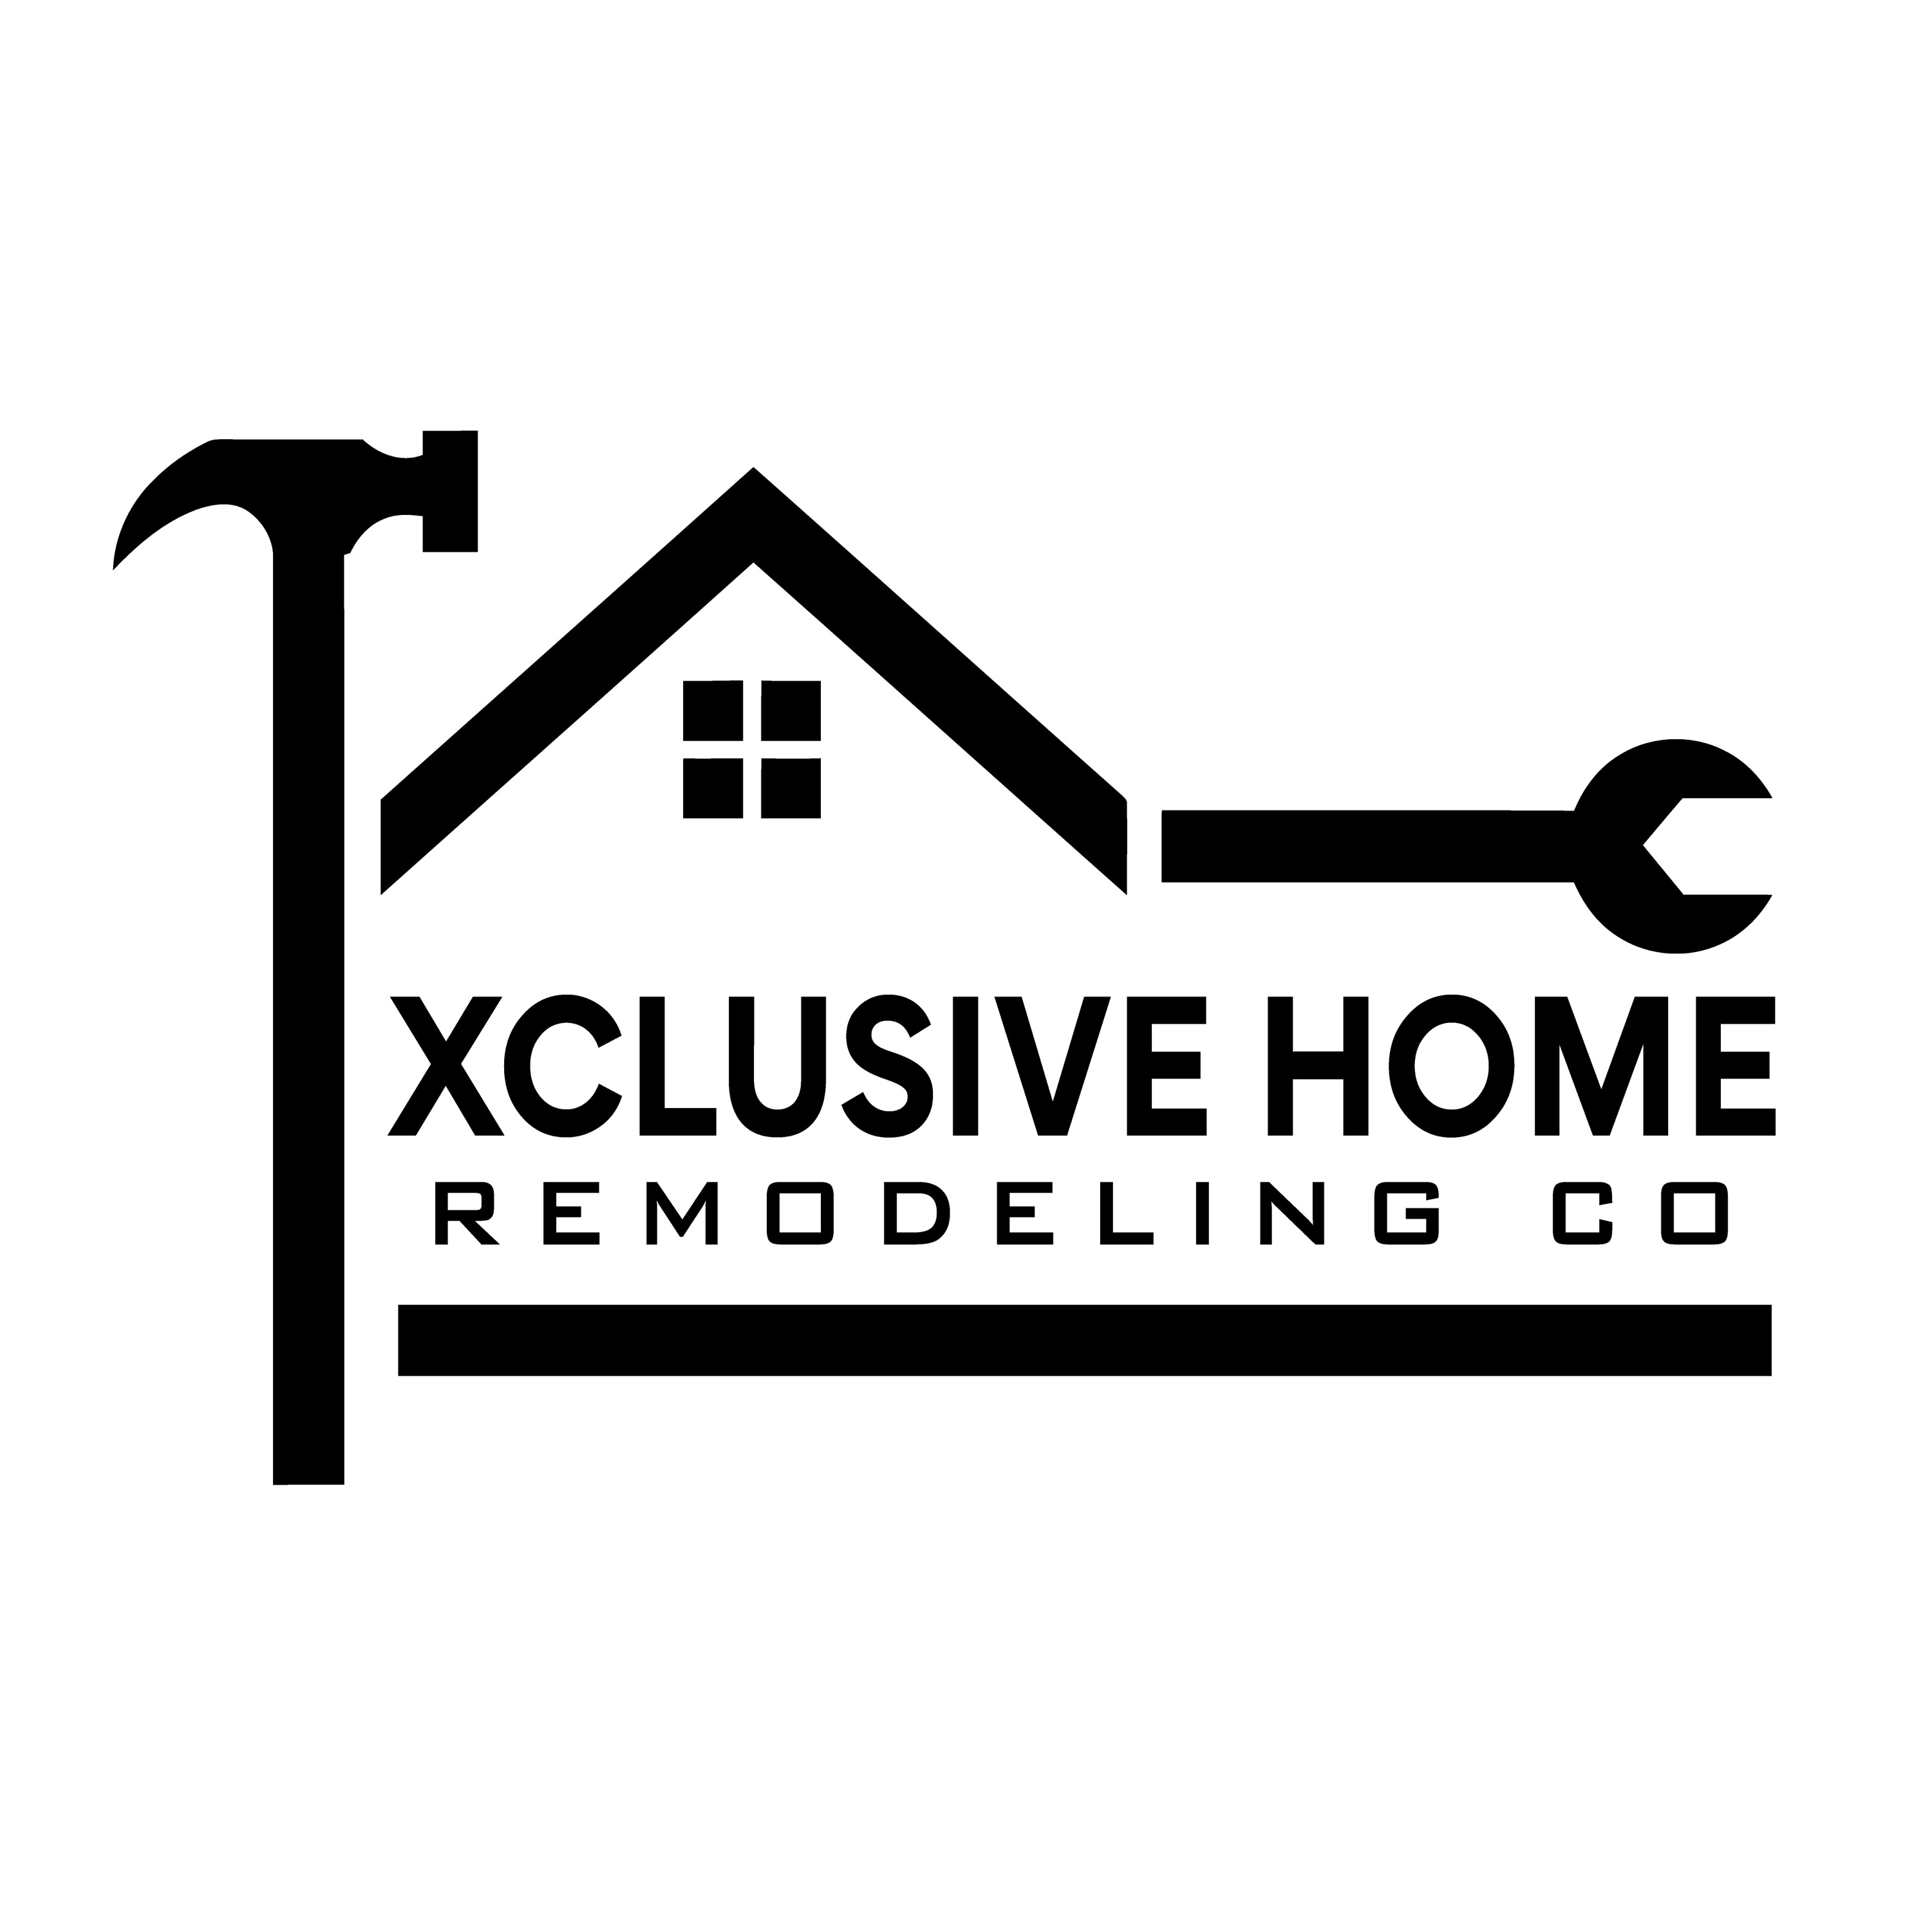 Xclusive Home Remodeling Co. Logo